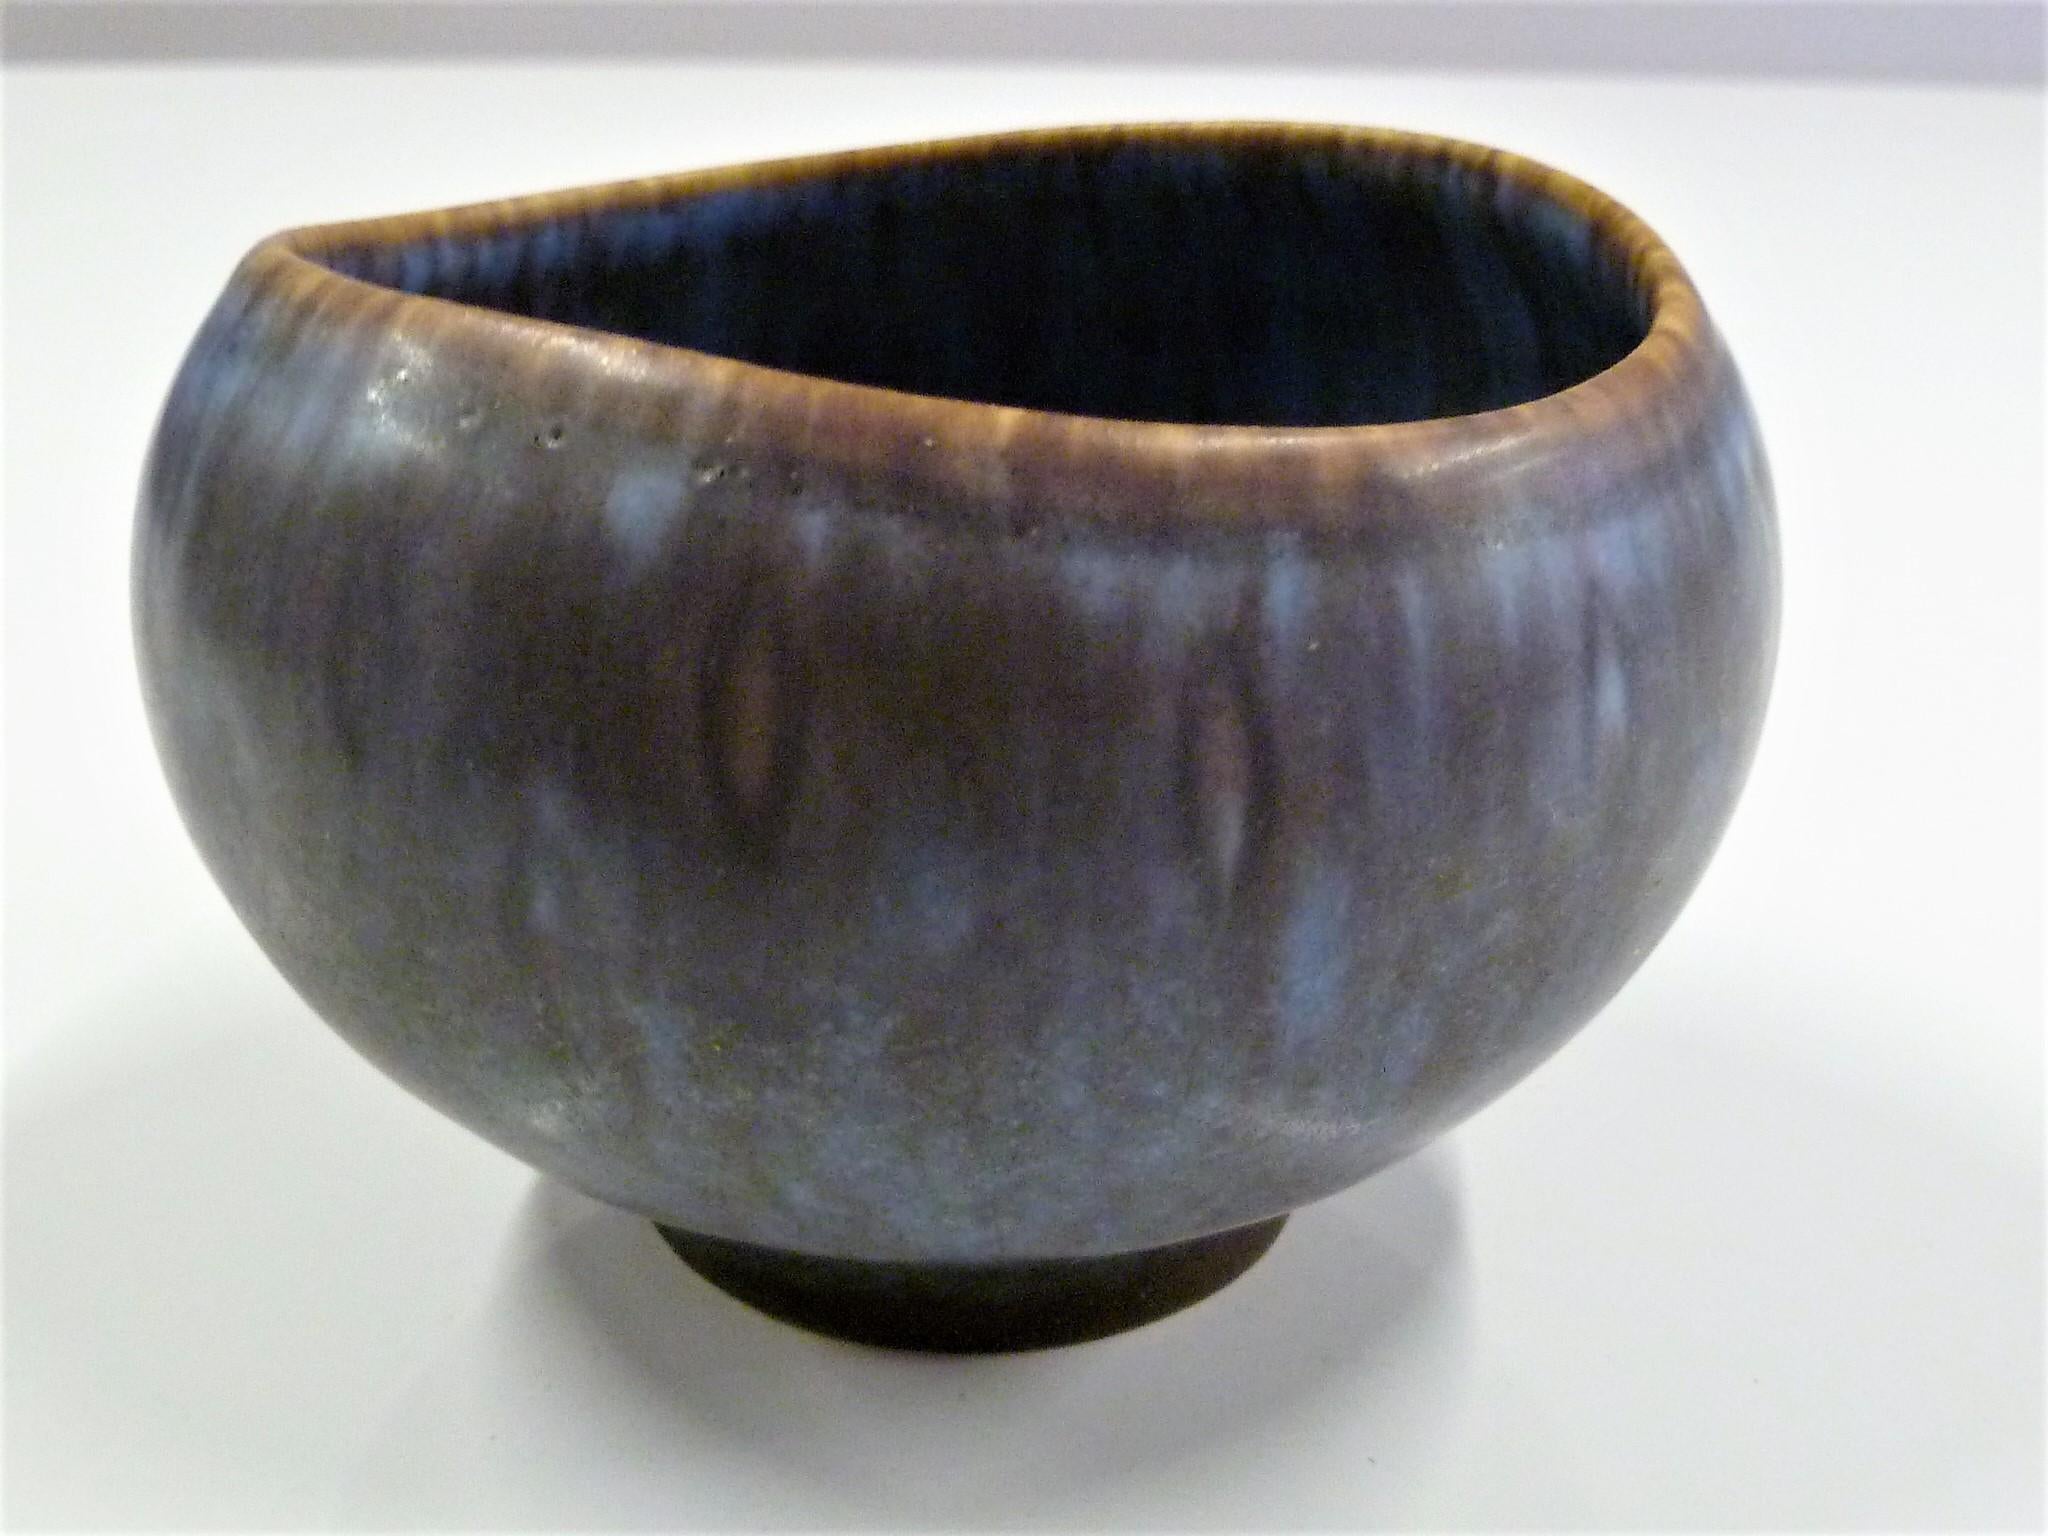 Scandinavian Modern stoneware petite pottery bowl by Gunnard Nylund for Rorstrand 1950s. Mottled glaze in blues, purple and brown, just beautiful. The vessel has no damages. The opening or mouth of bowl is elliptical rather than completely